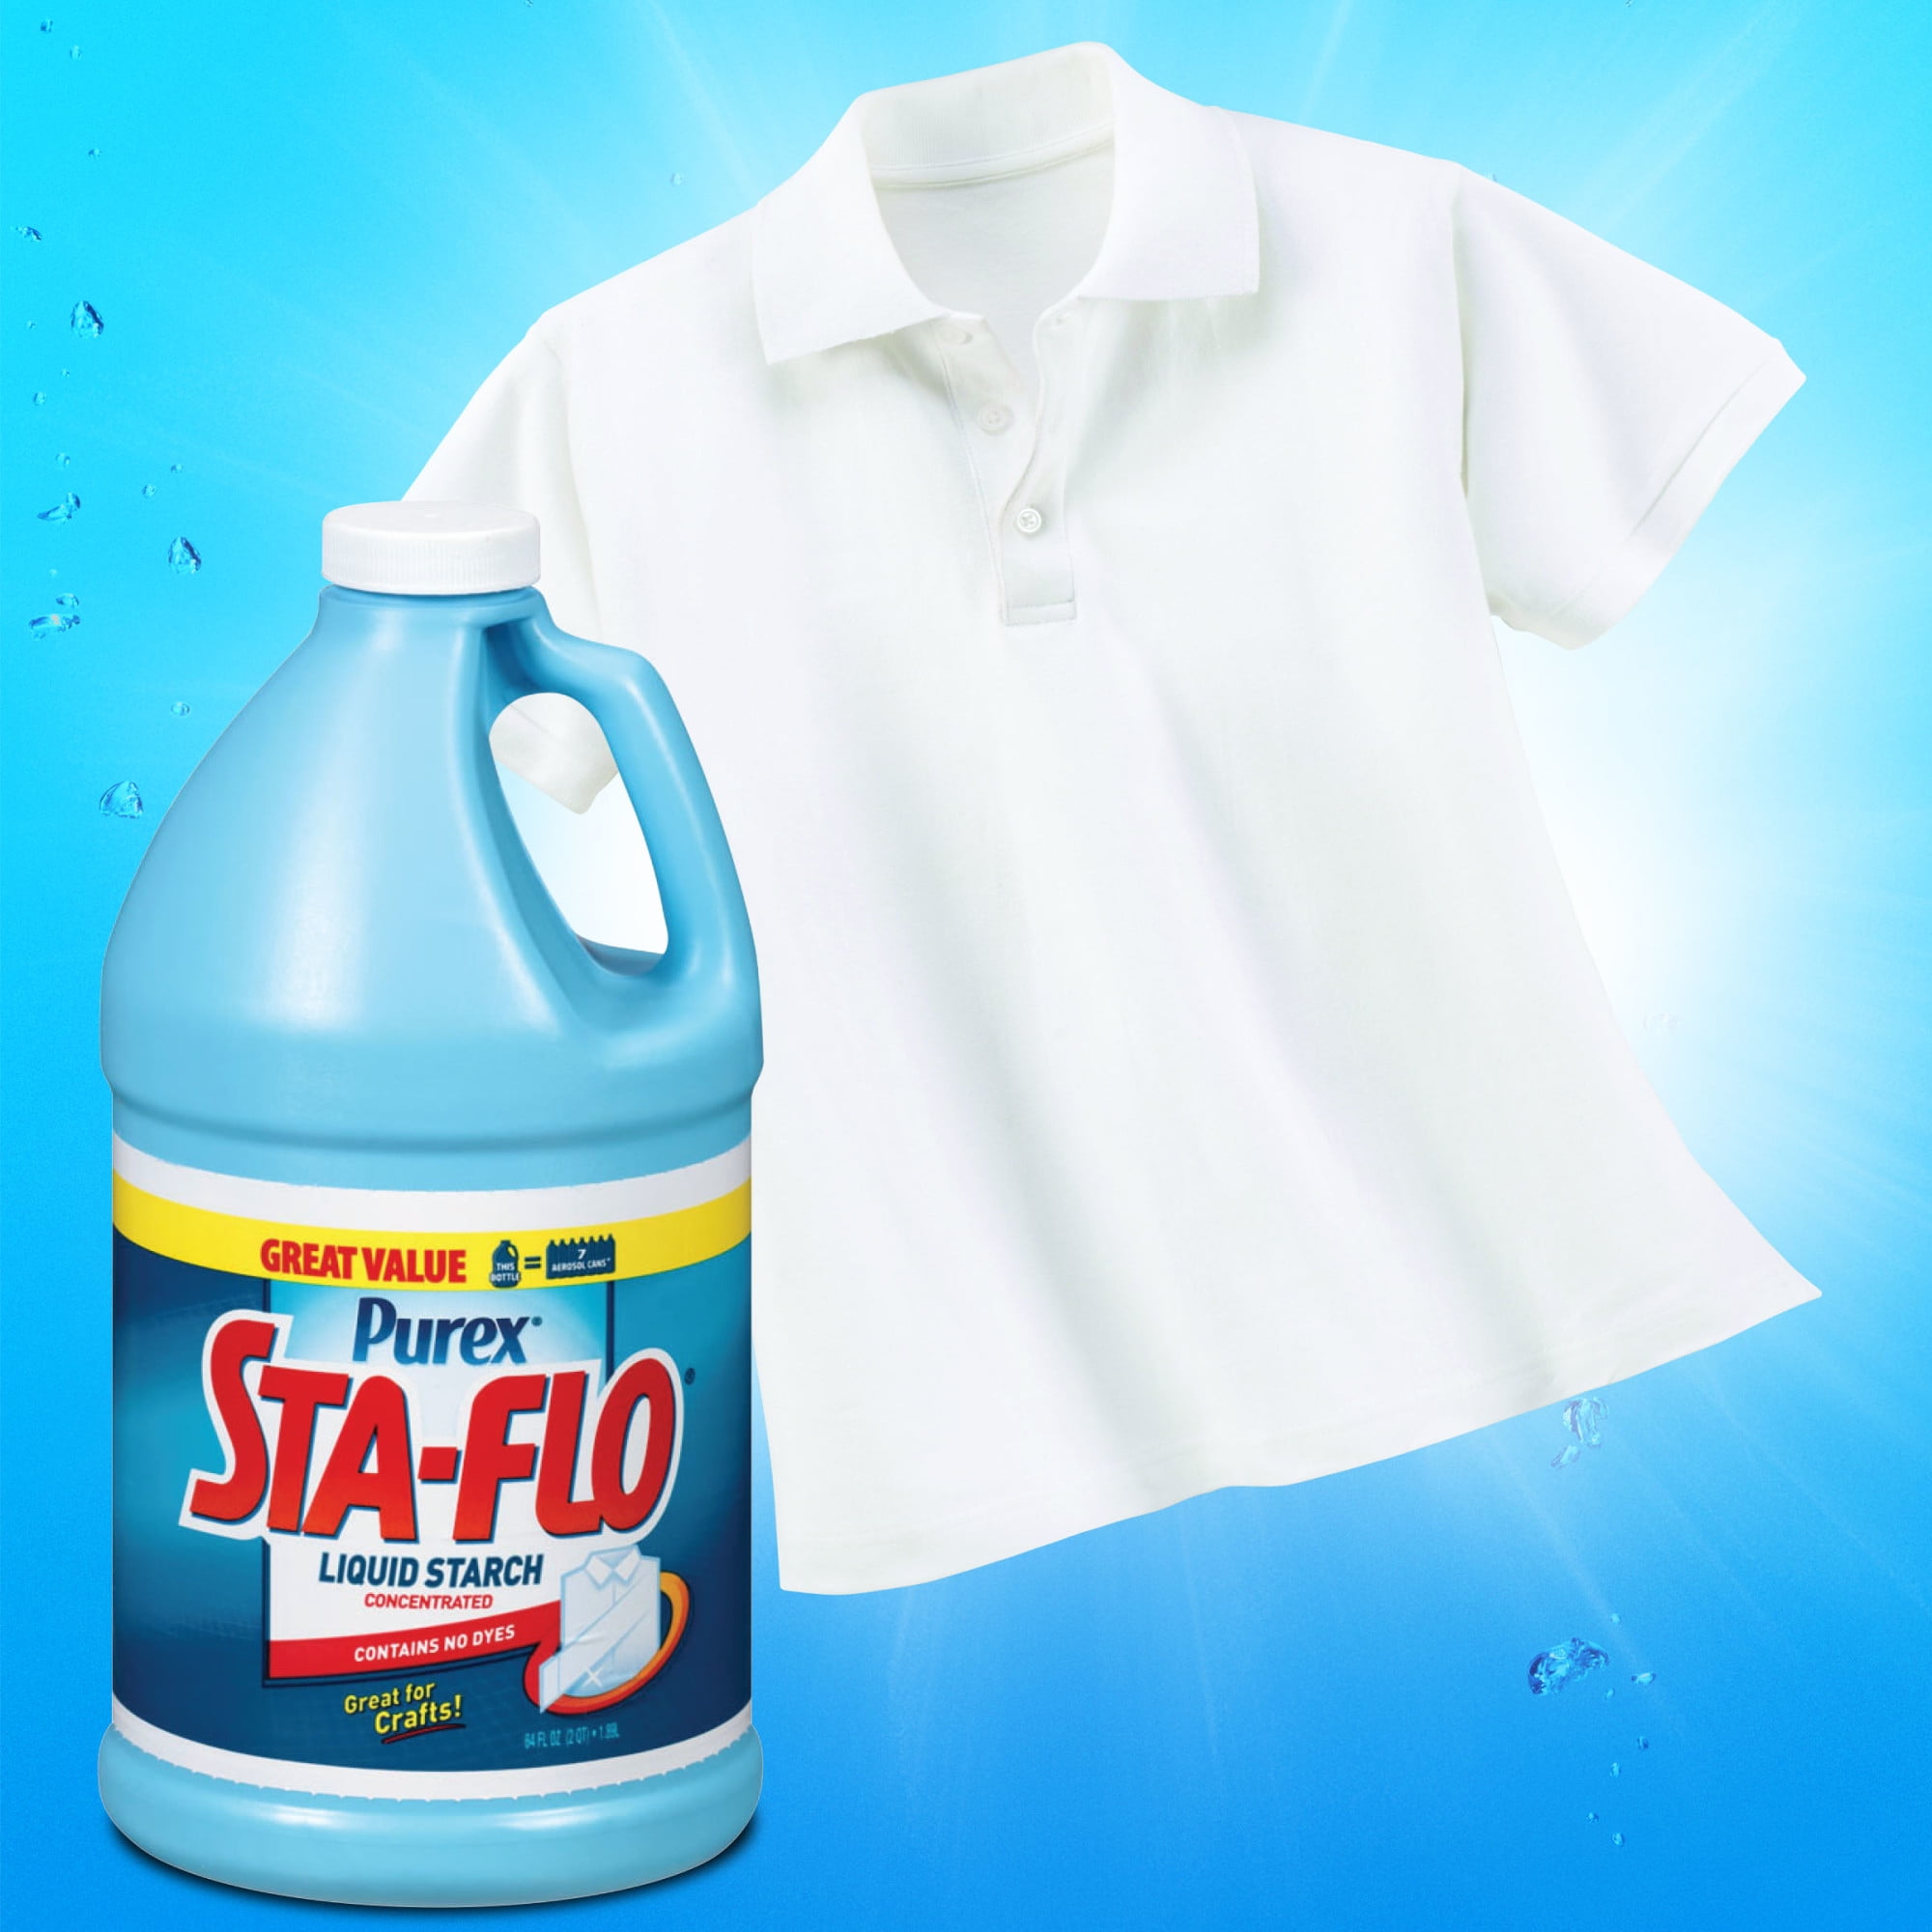 Purex Sta Flo Liquid Starch, Great for Crafts, Concentrated, 64 Ounce